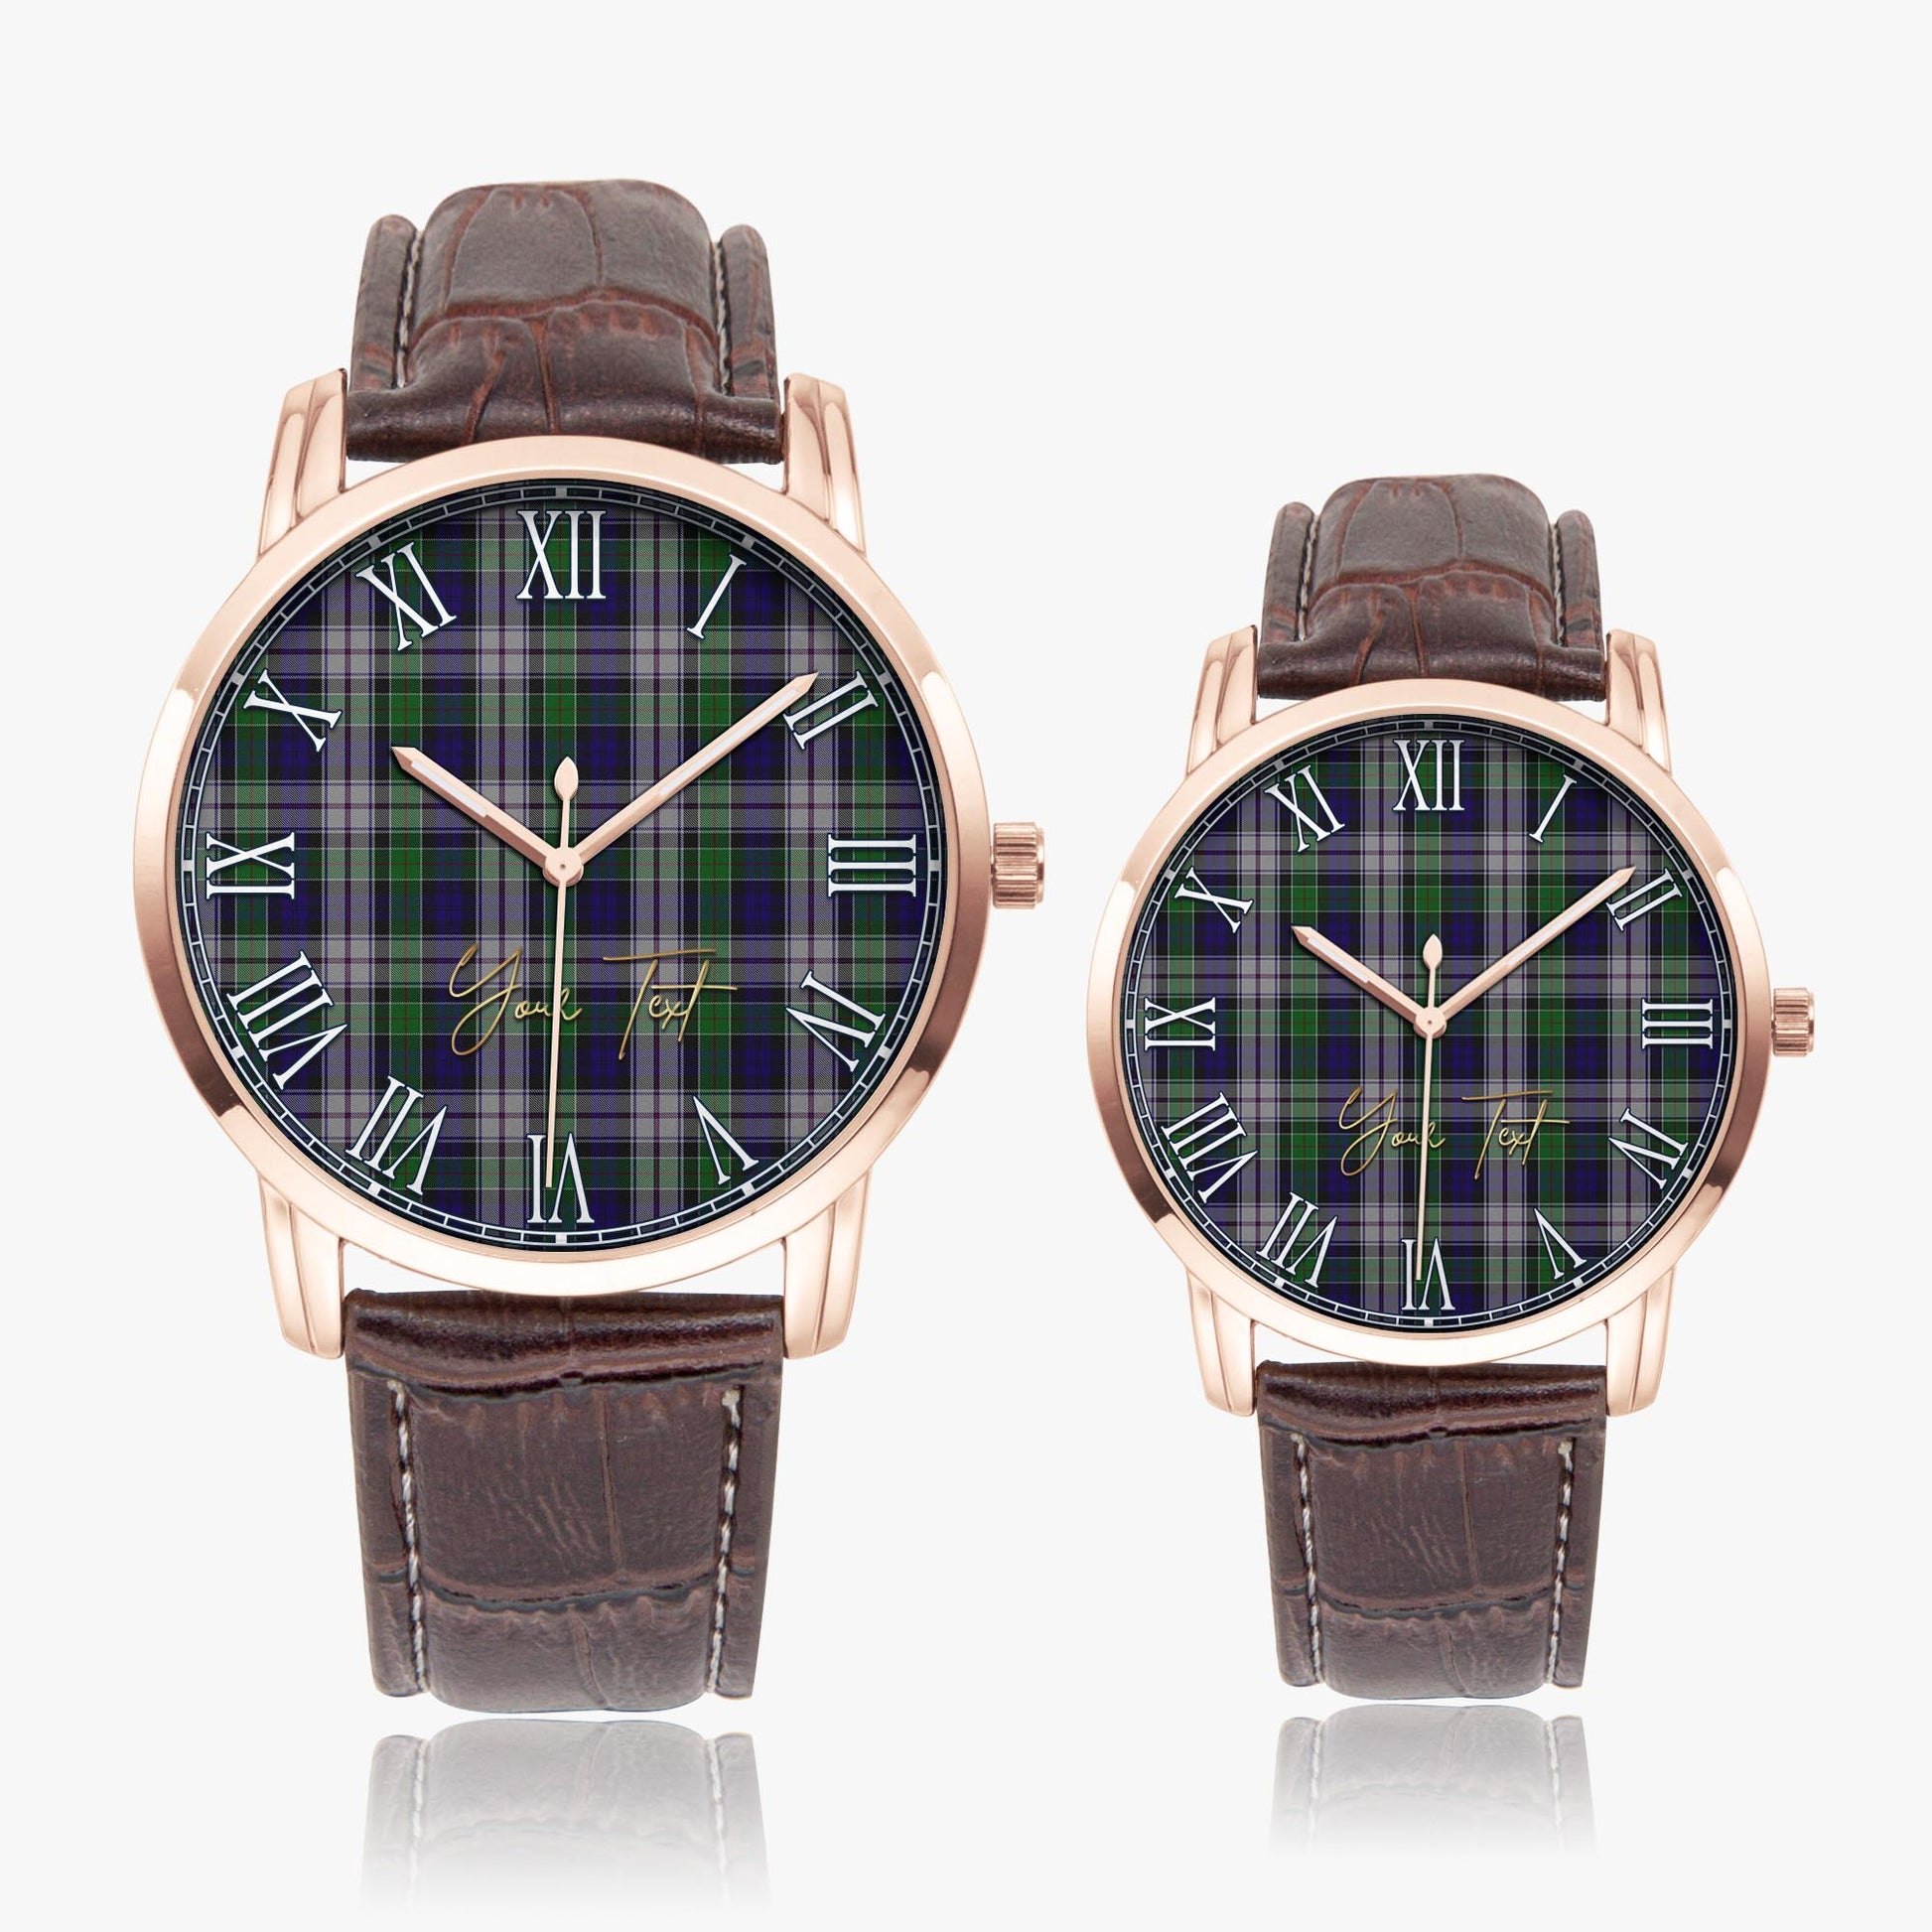 Colquhoun Dress Tartan Personalized Your Text Leather Trap Quartz Watch Wide Type Rose Gold Case With Brown Leather Strap - Tartanvibesclothing